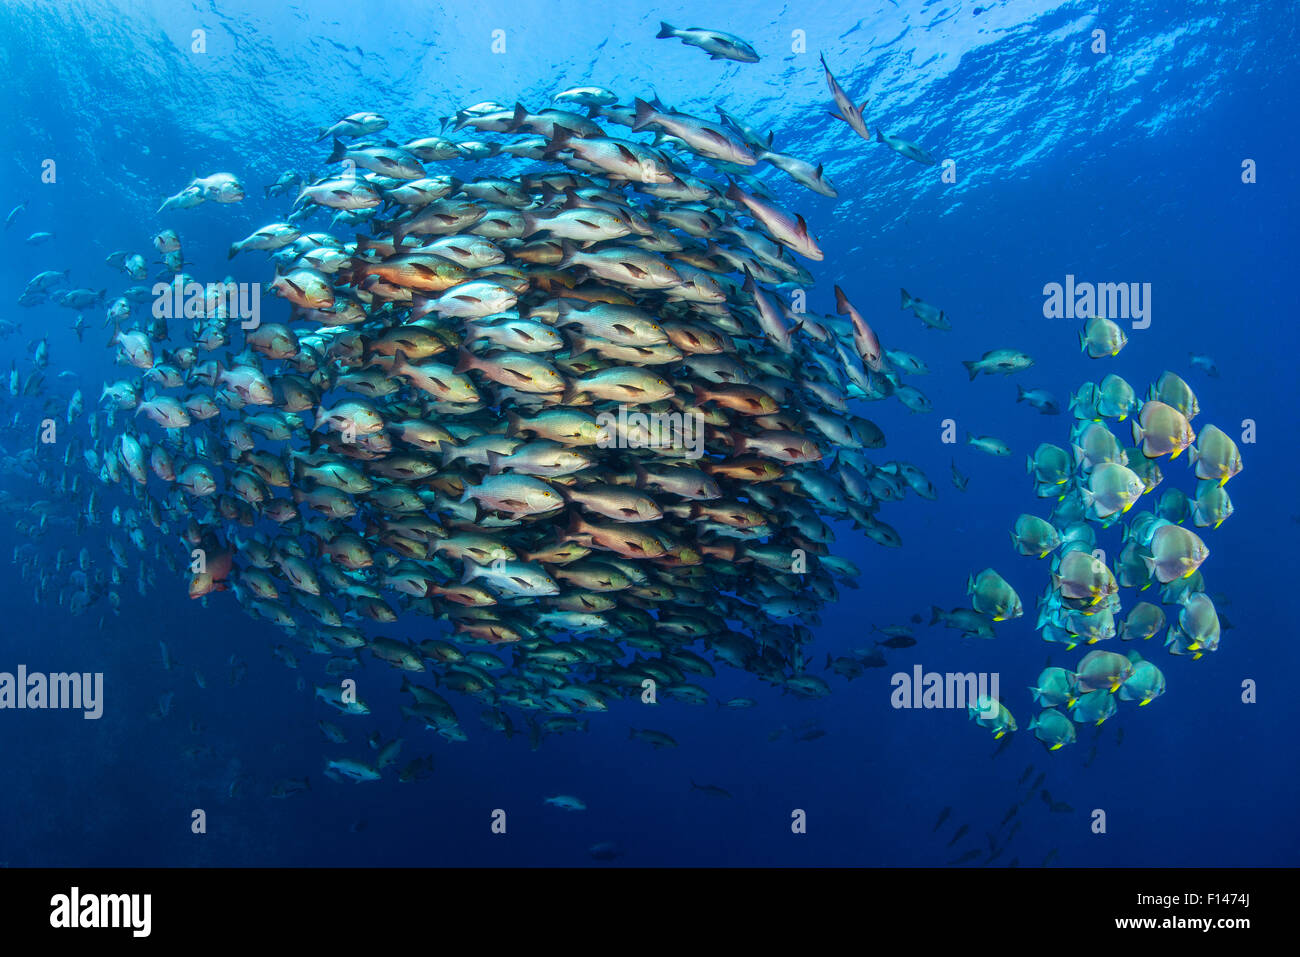 Large school of Bohar snappers (Lutjanus bohar) gather with smaller shoal of Batfish (Platax orbicularis) in open water off Ras Mohammed at the tip of Sinai, Egypt. These schools gather only in summer for mating. Red Sea. Stock Photo